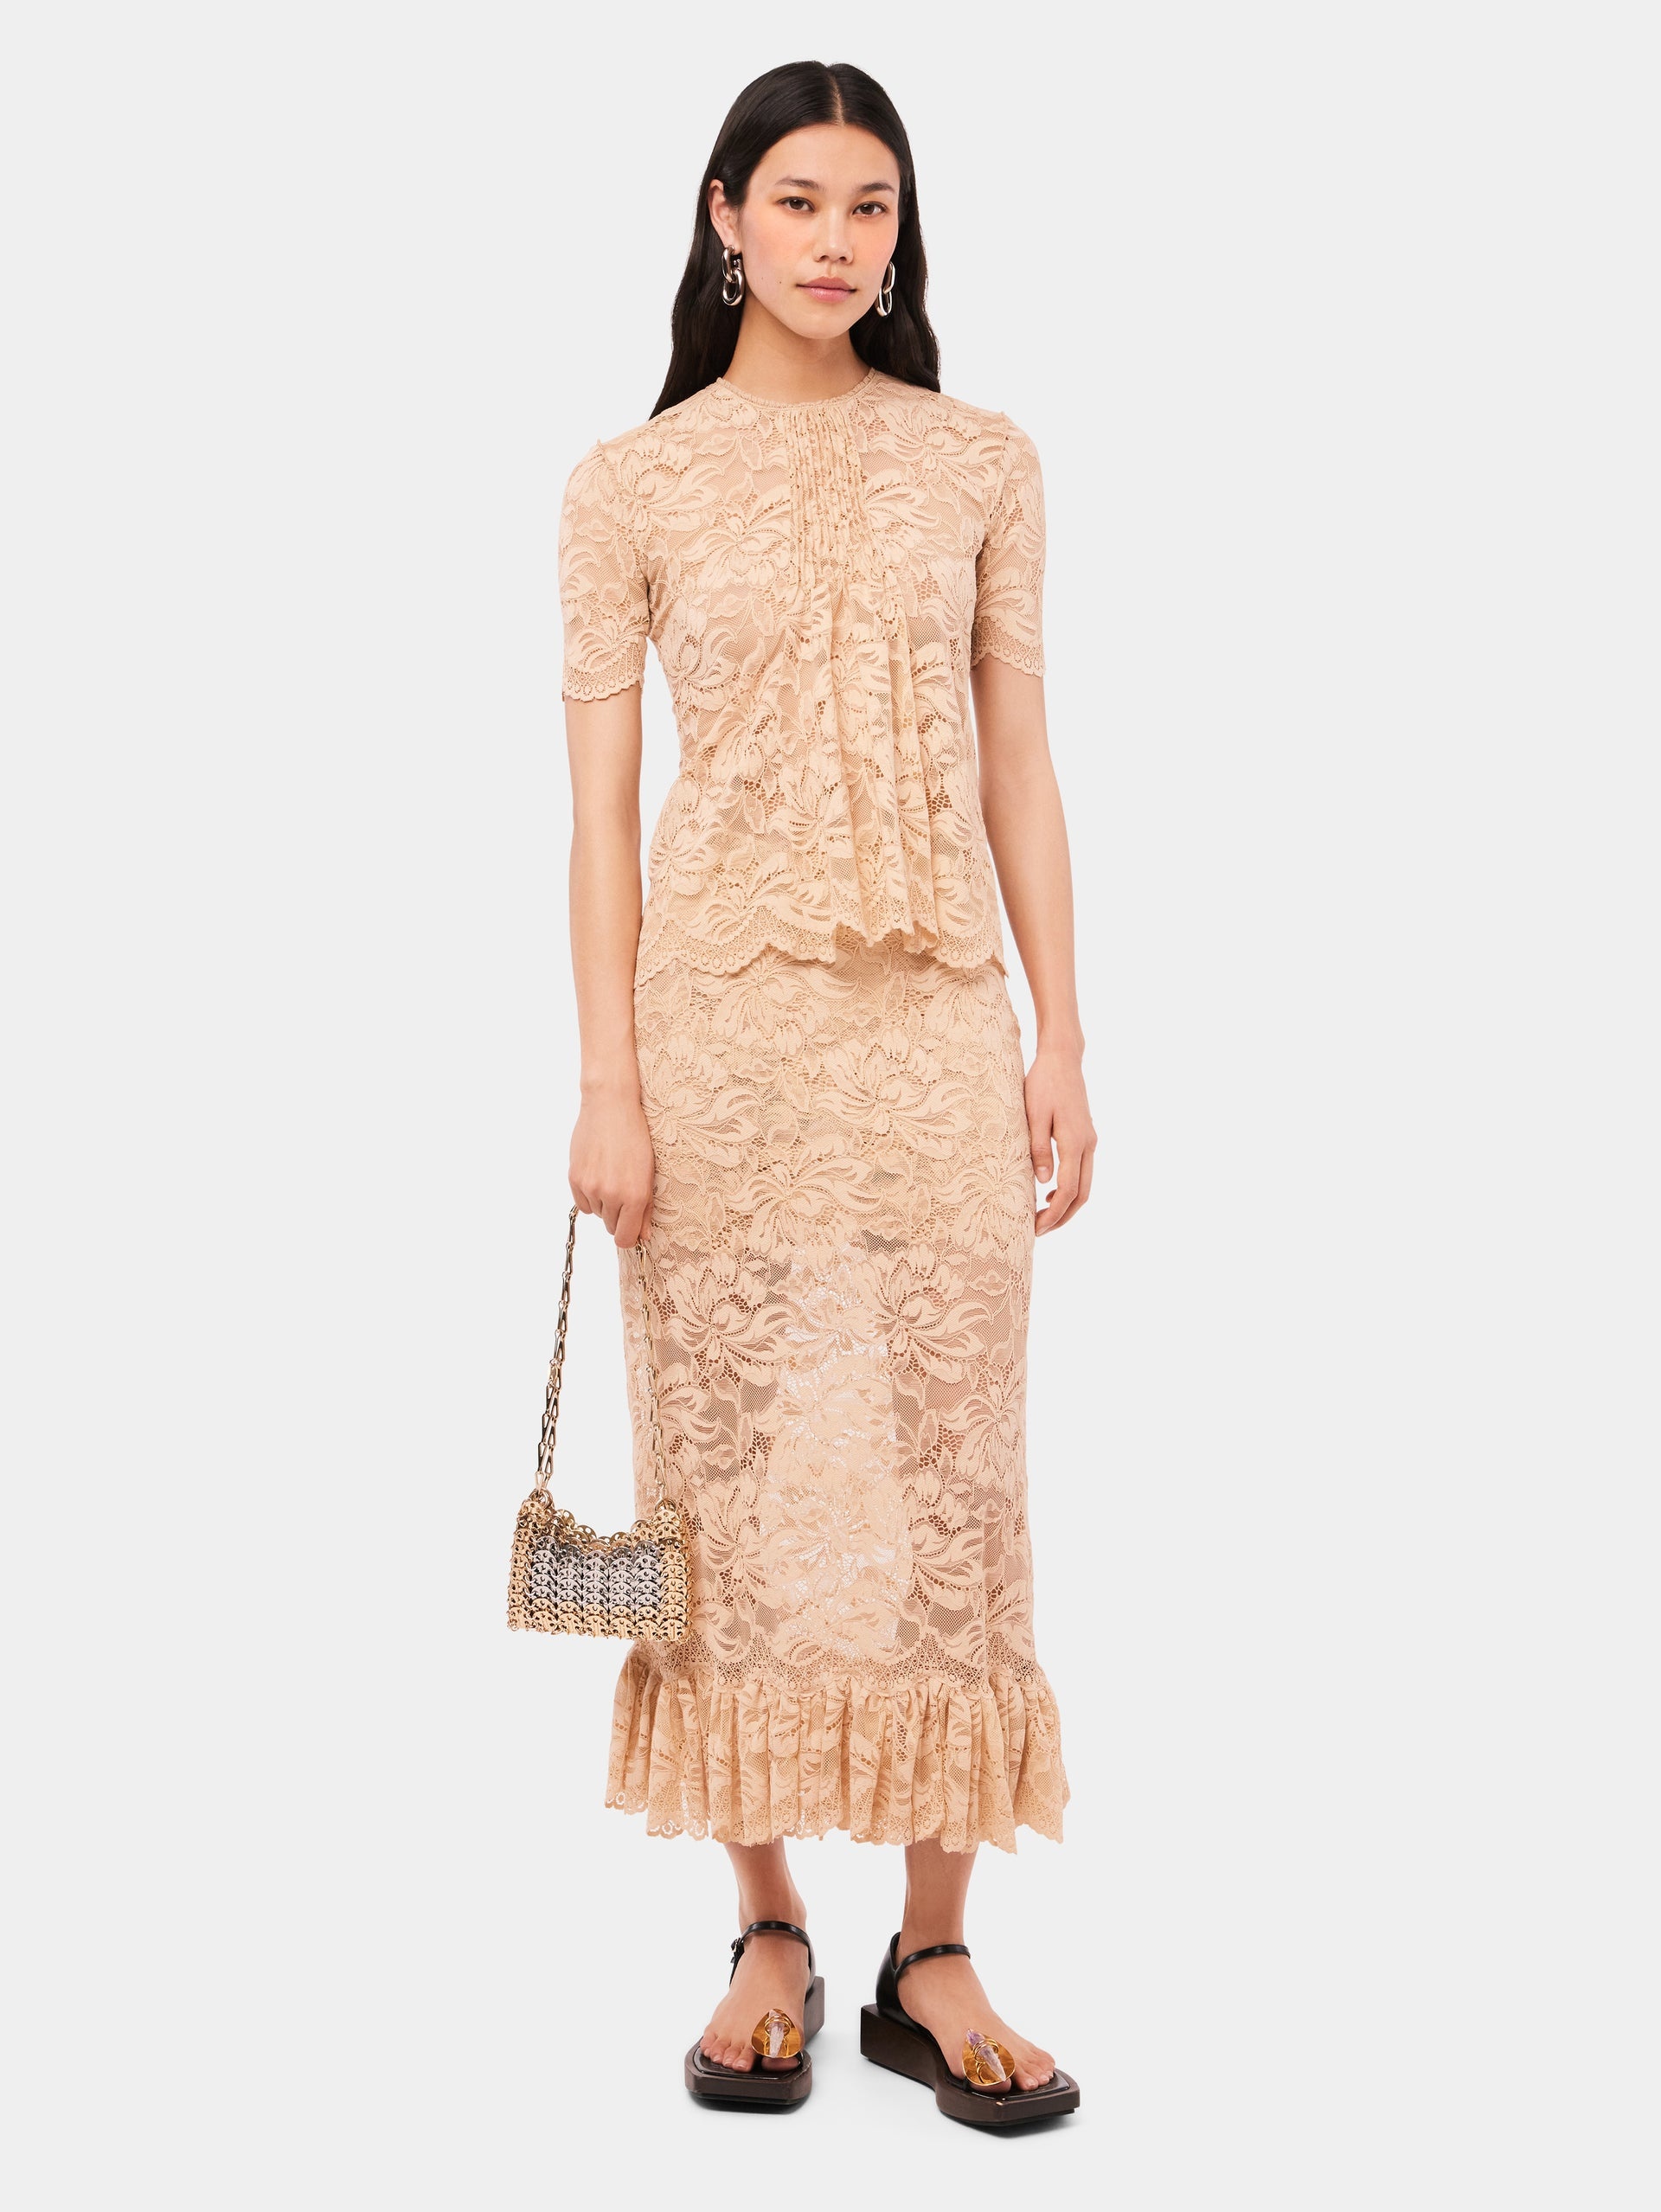 LONG RAFFIA COLORED SKIRT IN LACE - 1